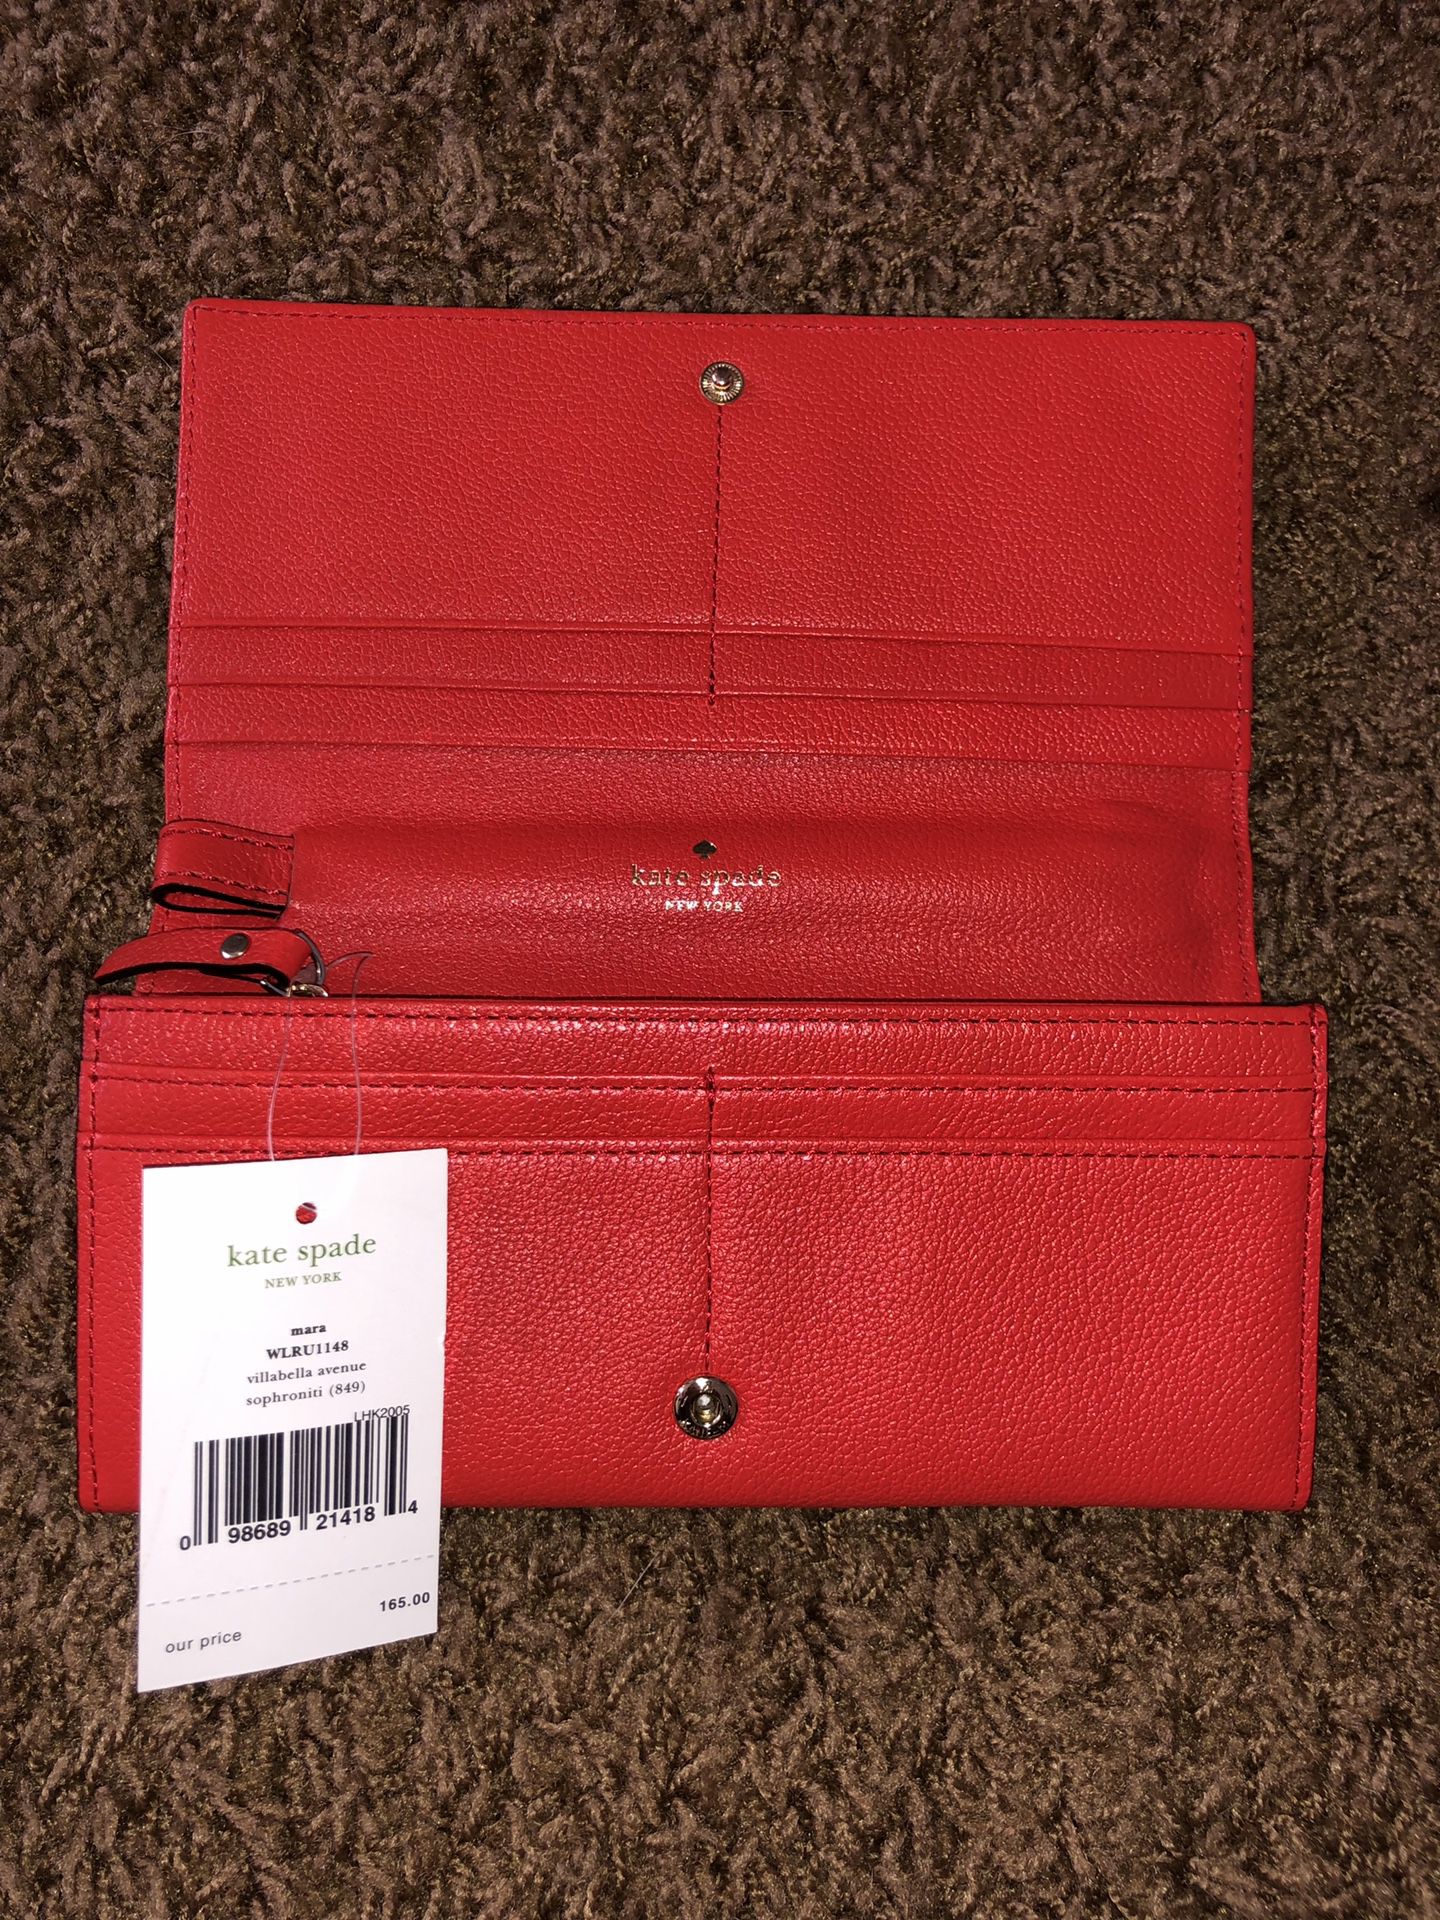 New Kate Spade red wallet